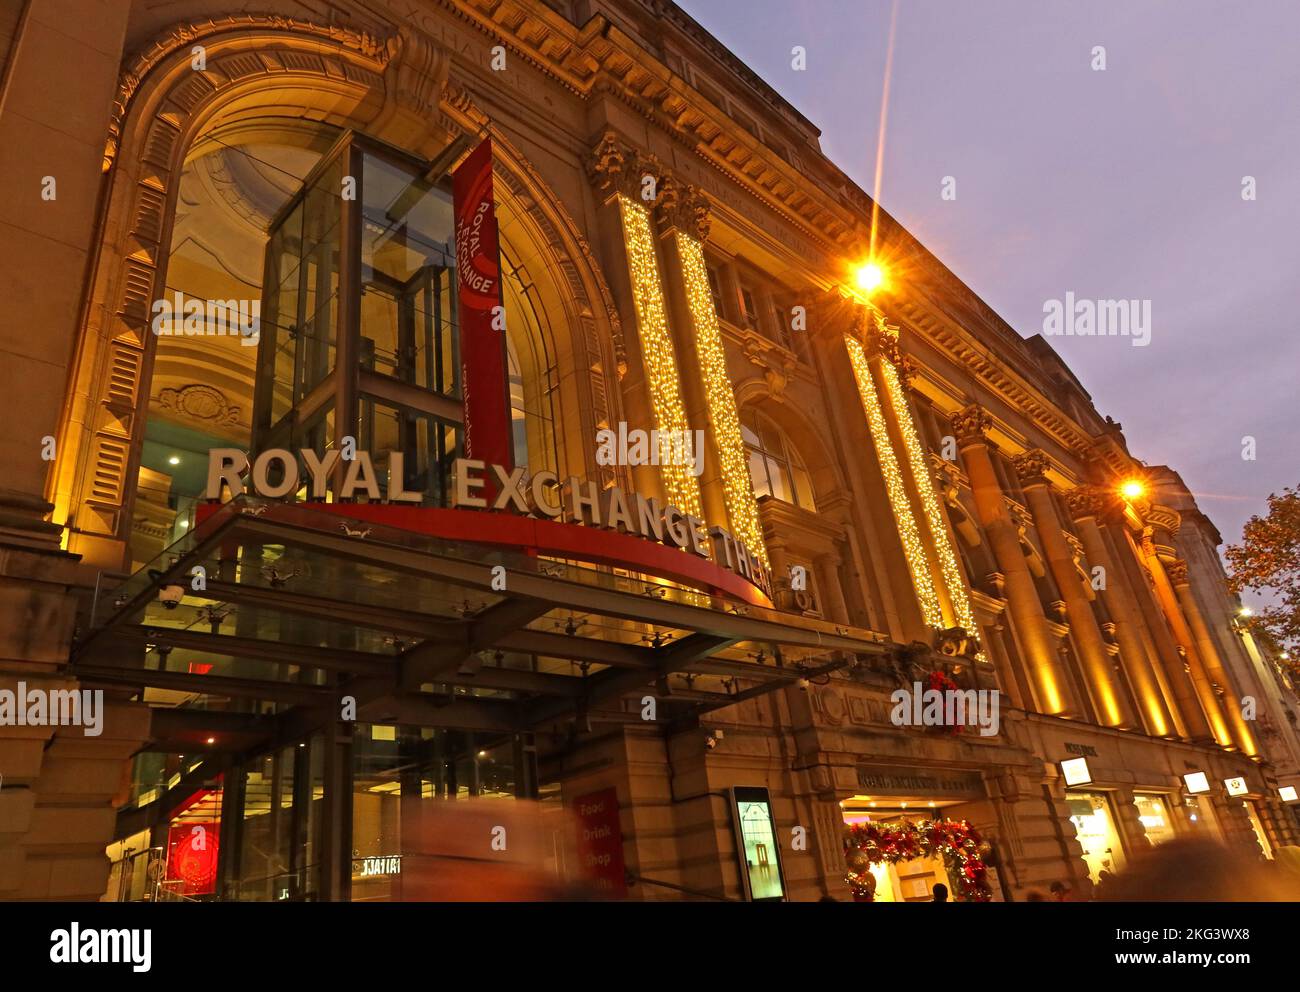 Manchester Royal Exchange theatre, at night, St Anns Square, city centre Manchester, England, UK, M2 7DH Stock Photo